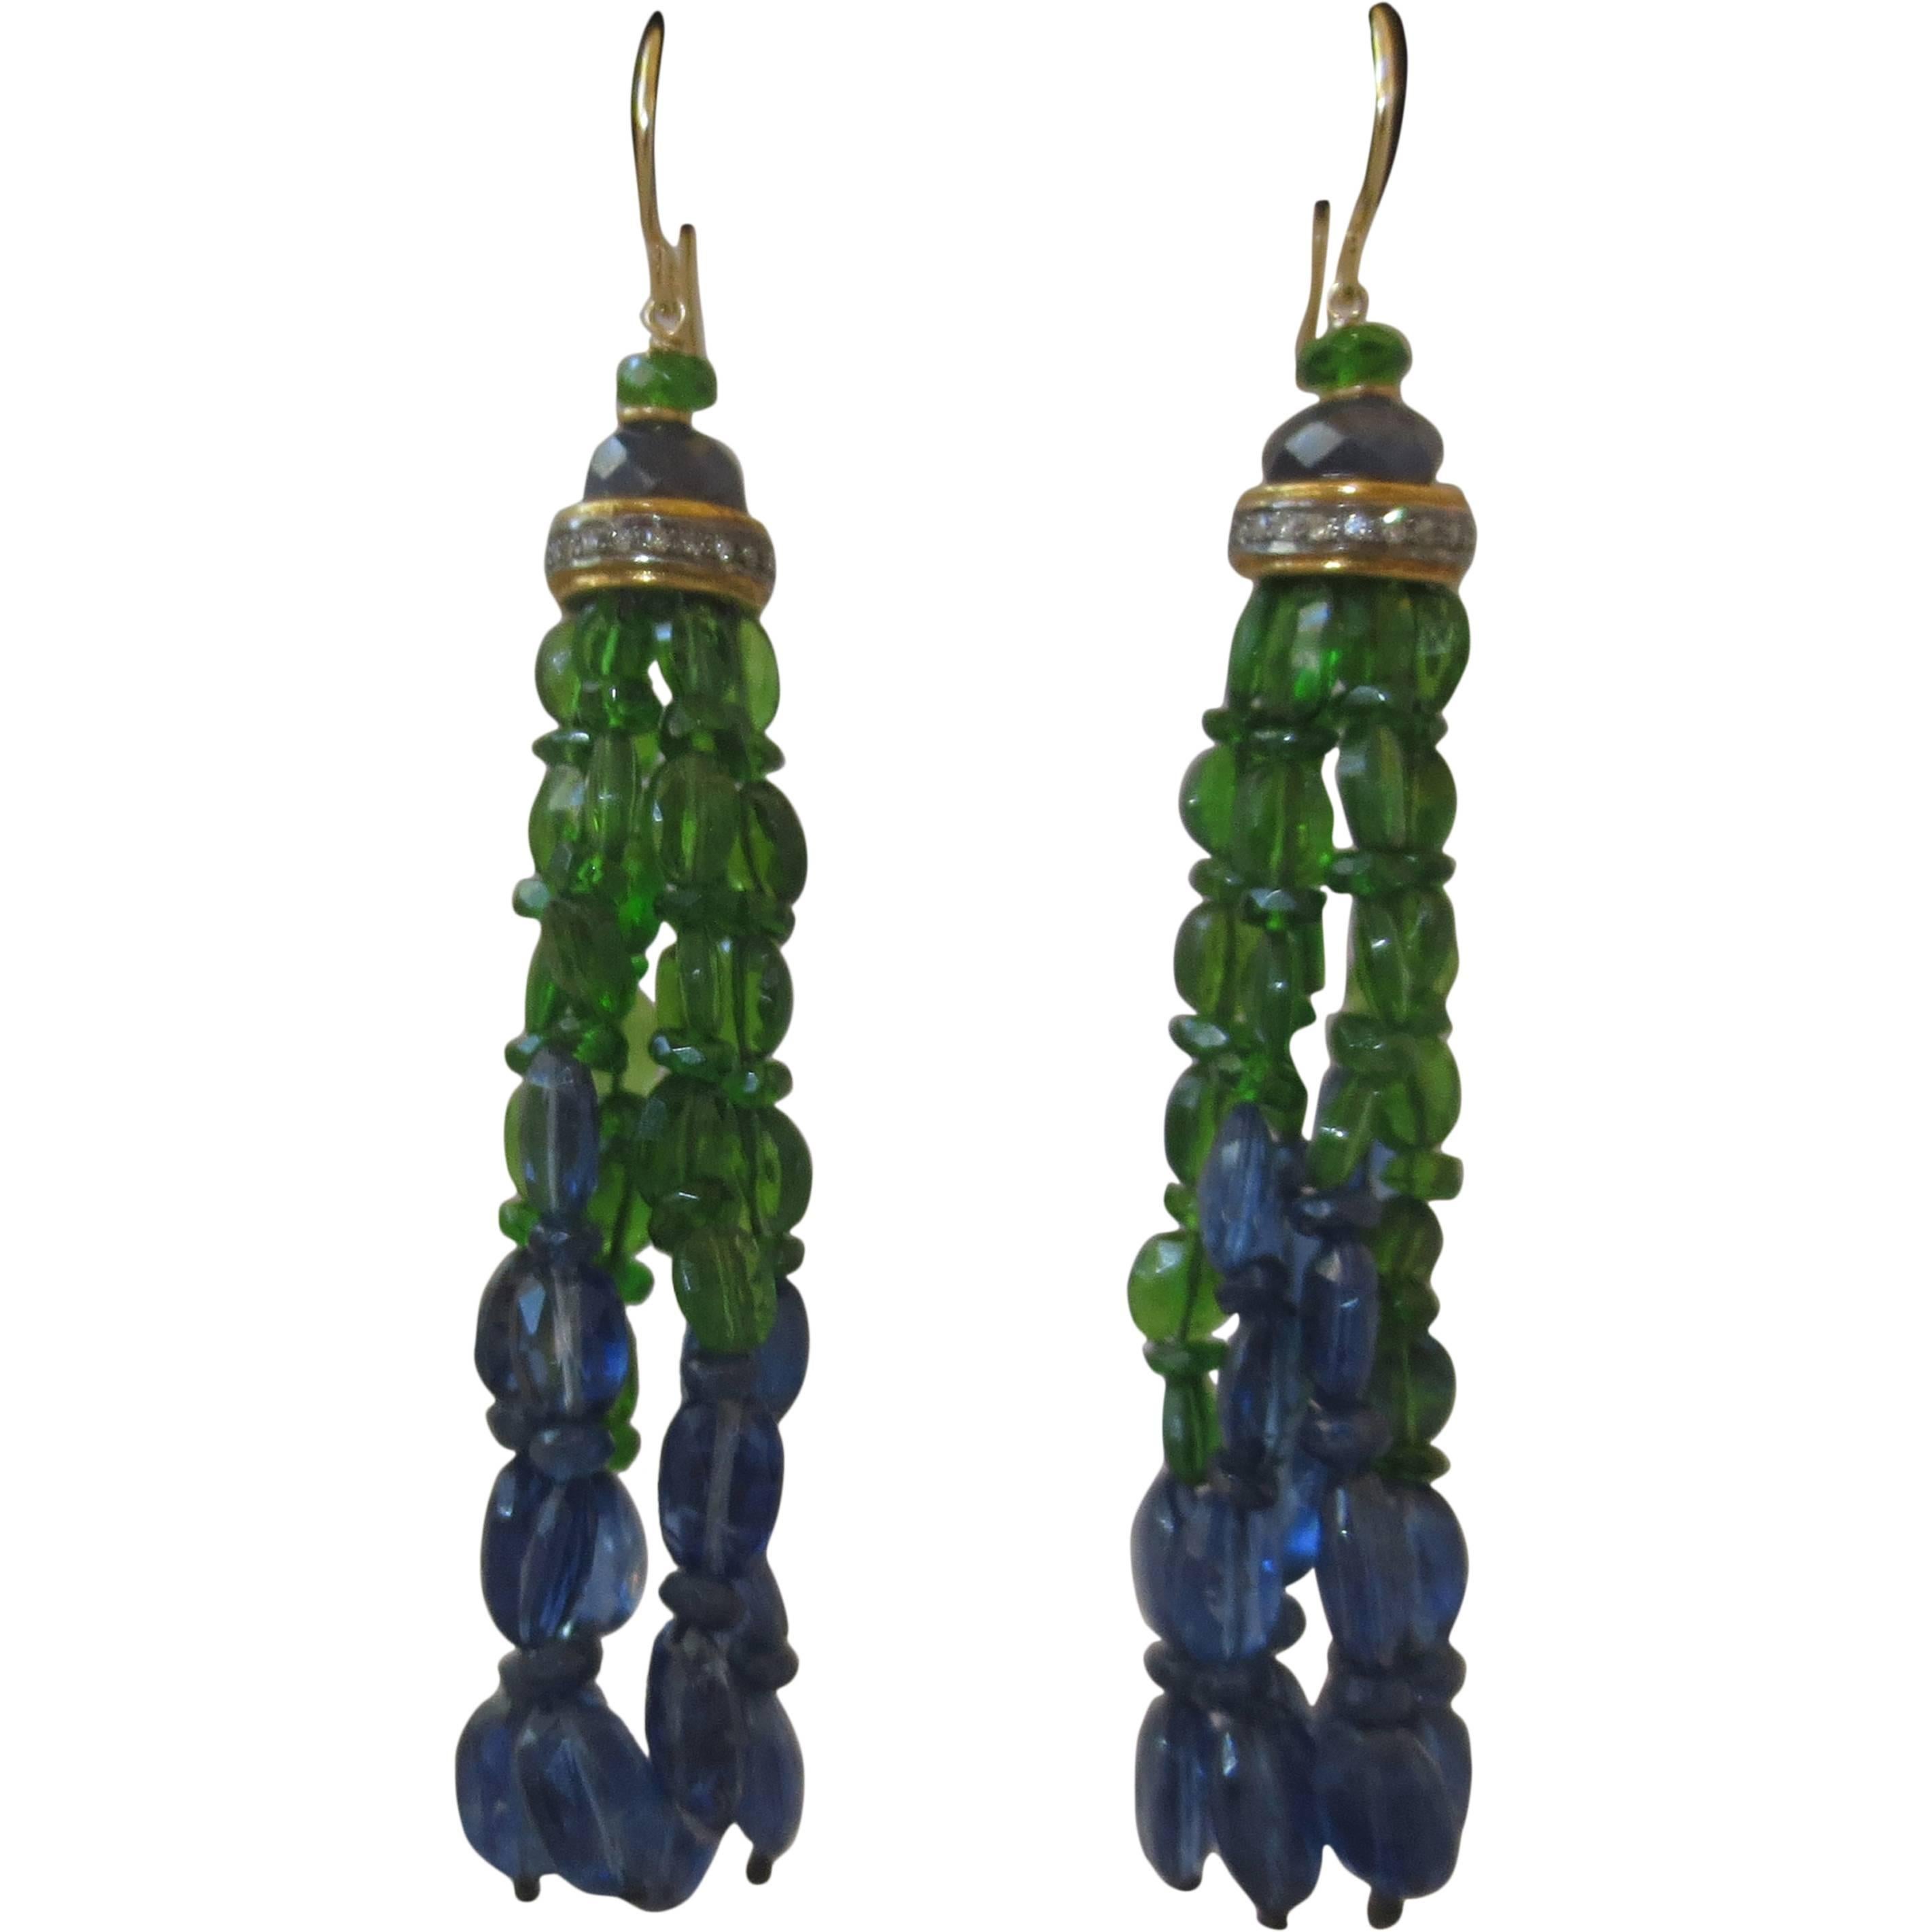 This beautiful kyanite, sapphire, and tsavorite tassel earrings with 14 k yellow gold are made by Marina J.. Topped by one tsavorite and one sapphire bead, placed over a silver, gold, and diamond-encrusted roundel. The tassel's strands exit the